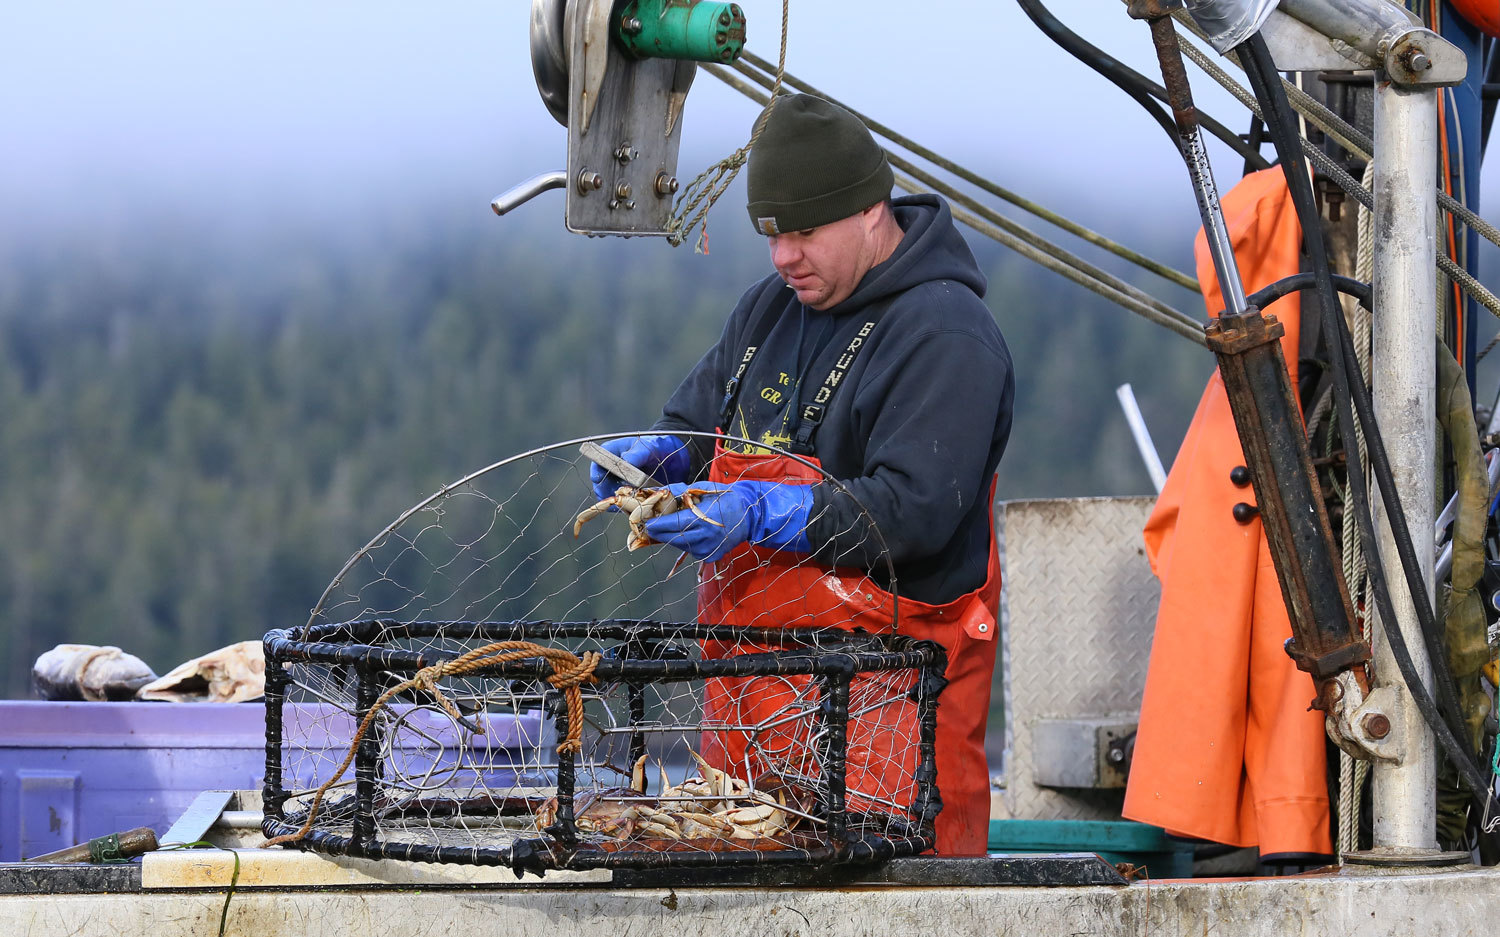 Dungeness_crab_commercial_fishing_2082.jpg